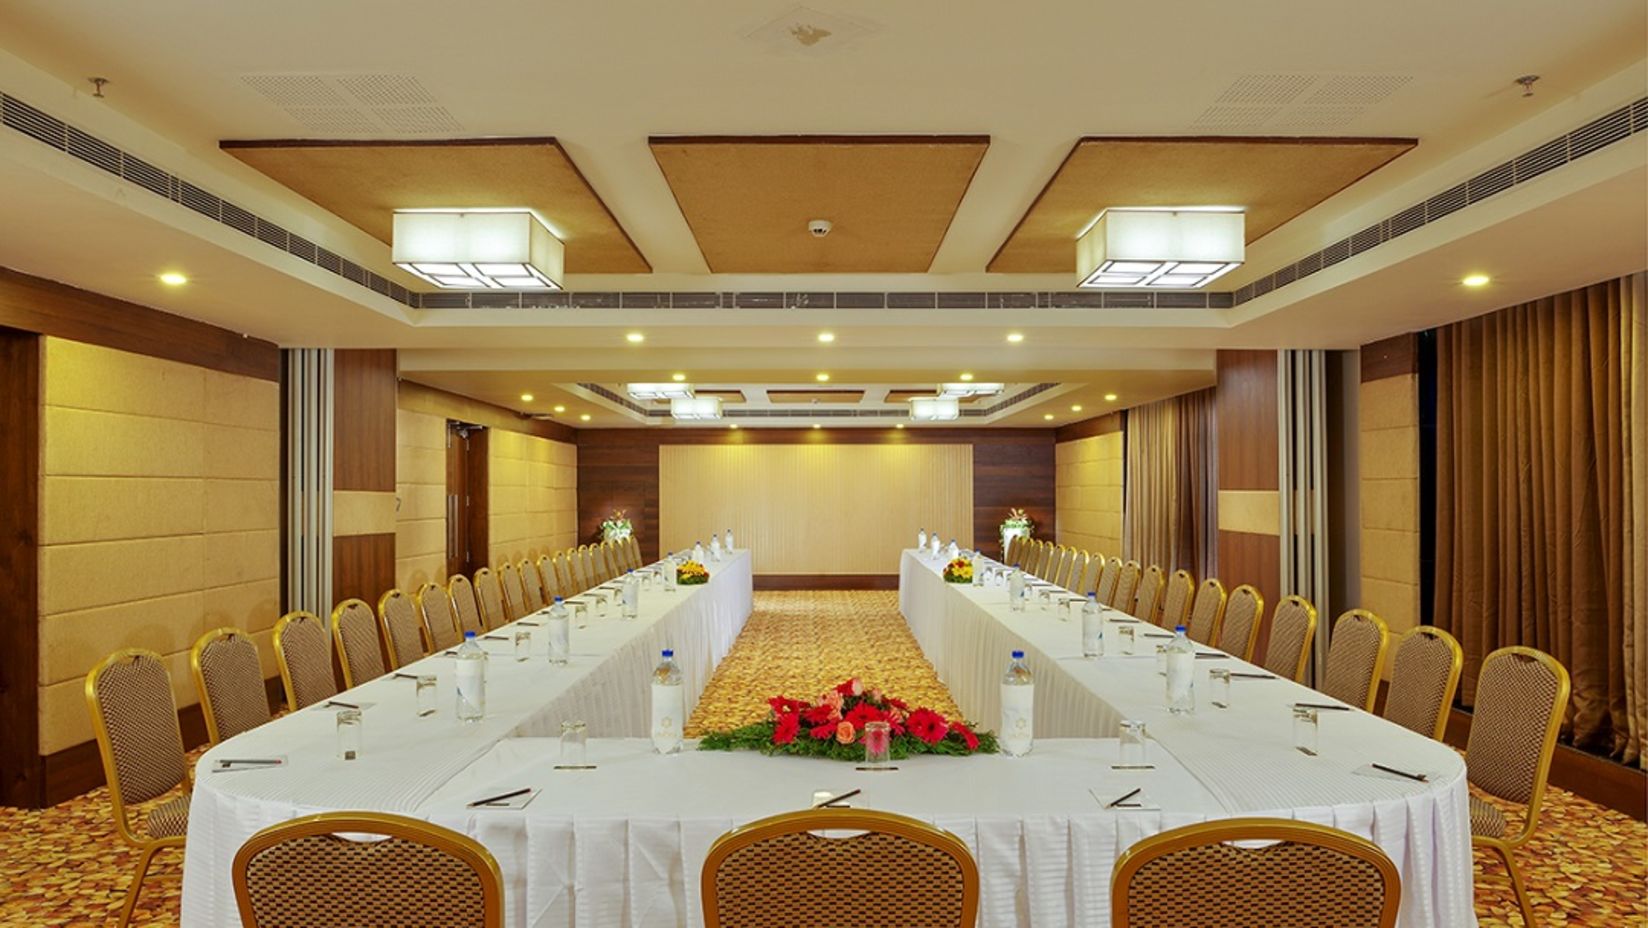 Dimora Thiruvananthapuram - image of Ruby 1 conference hall featuring brown and beige interiors and a U-shaped seating arrangement